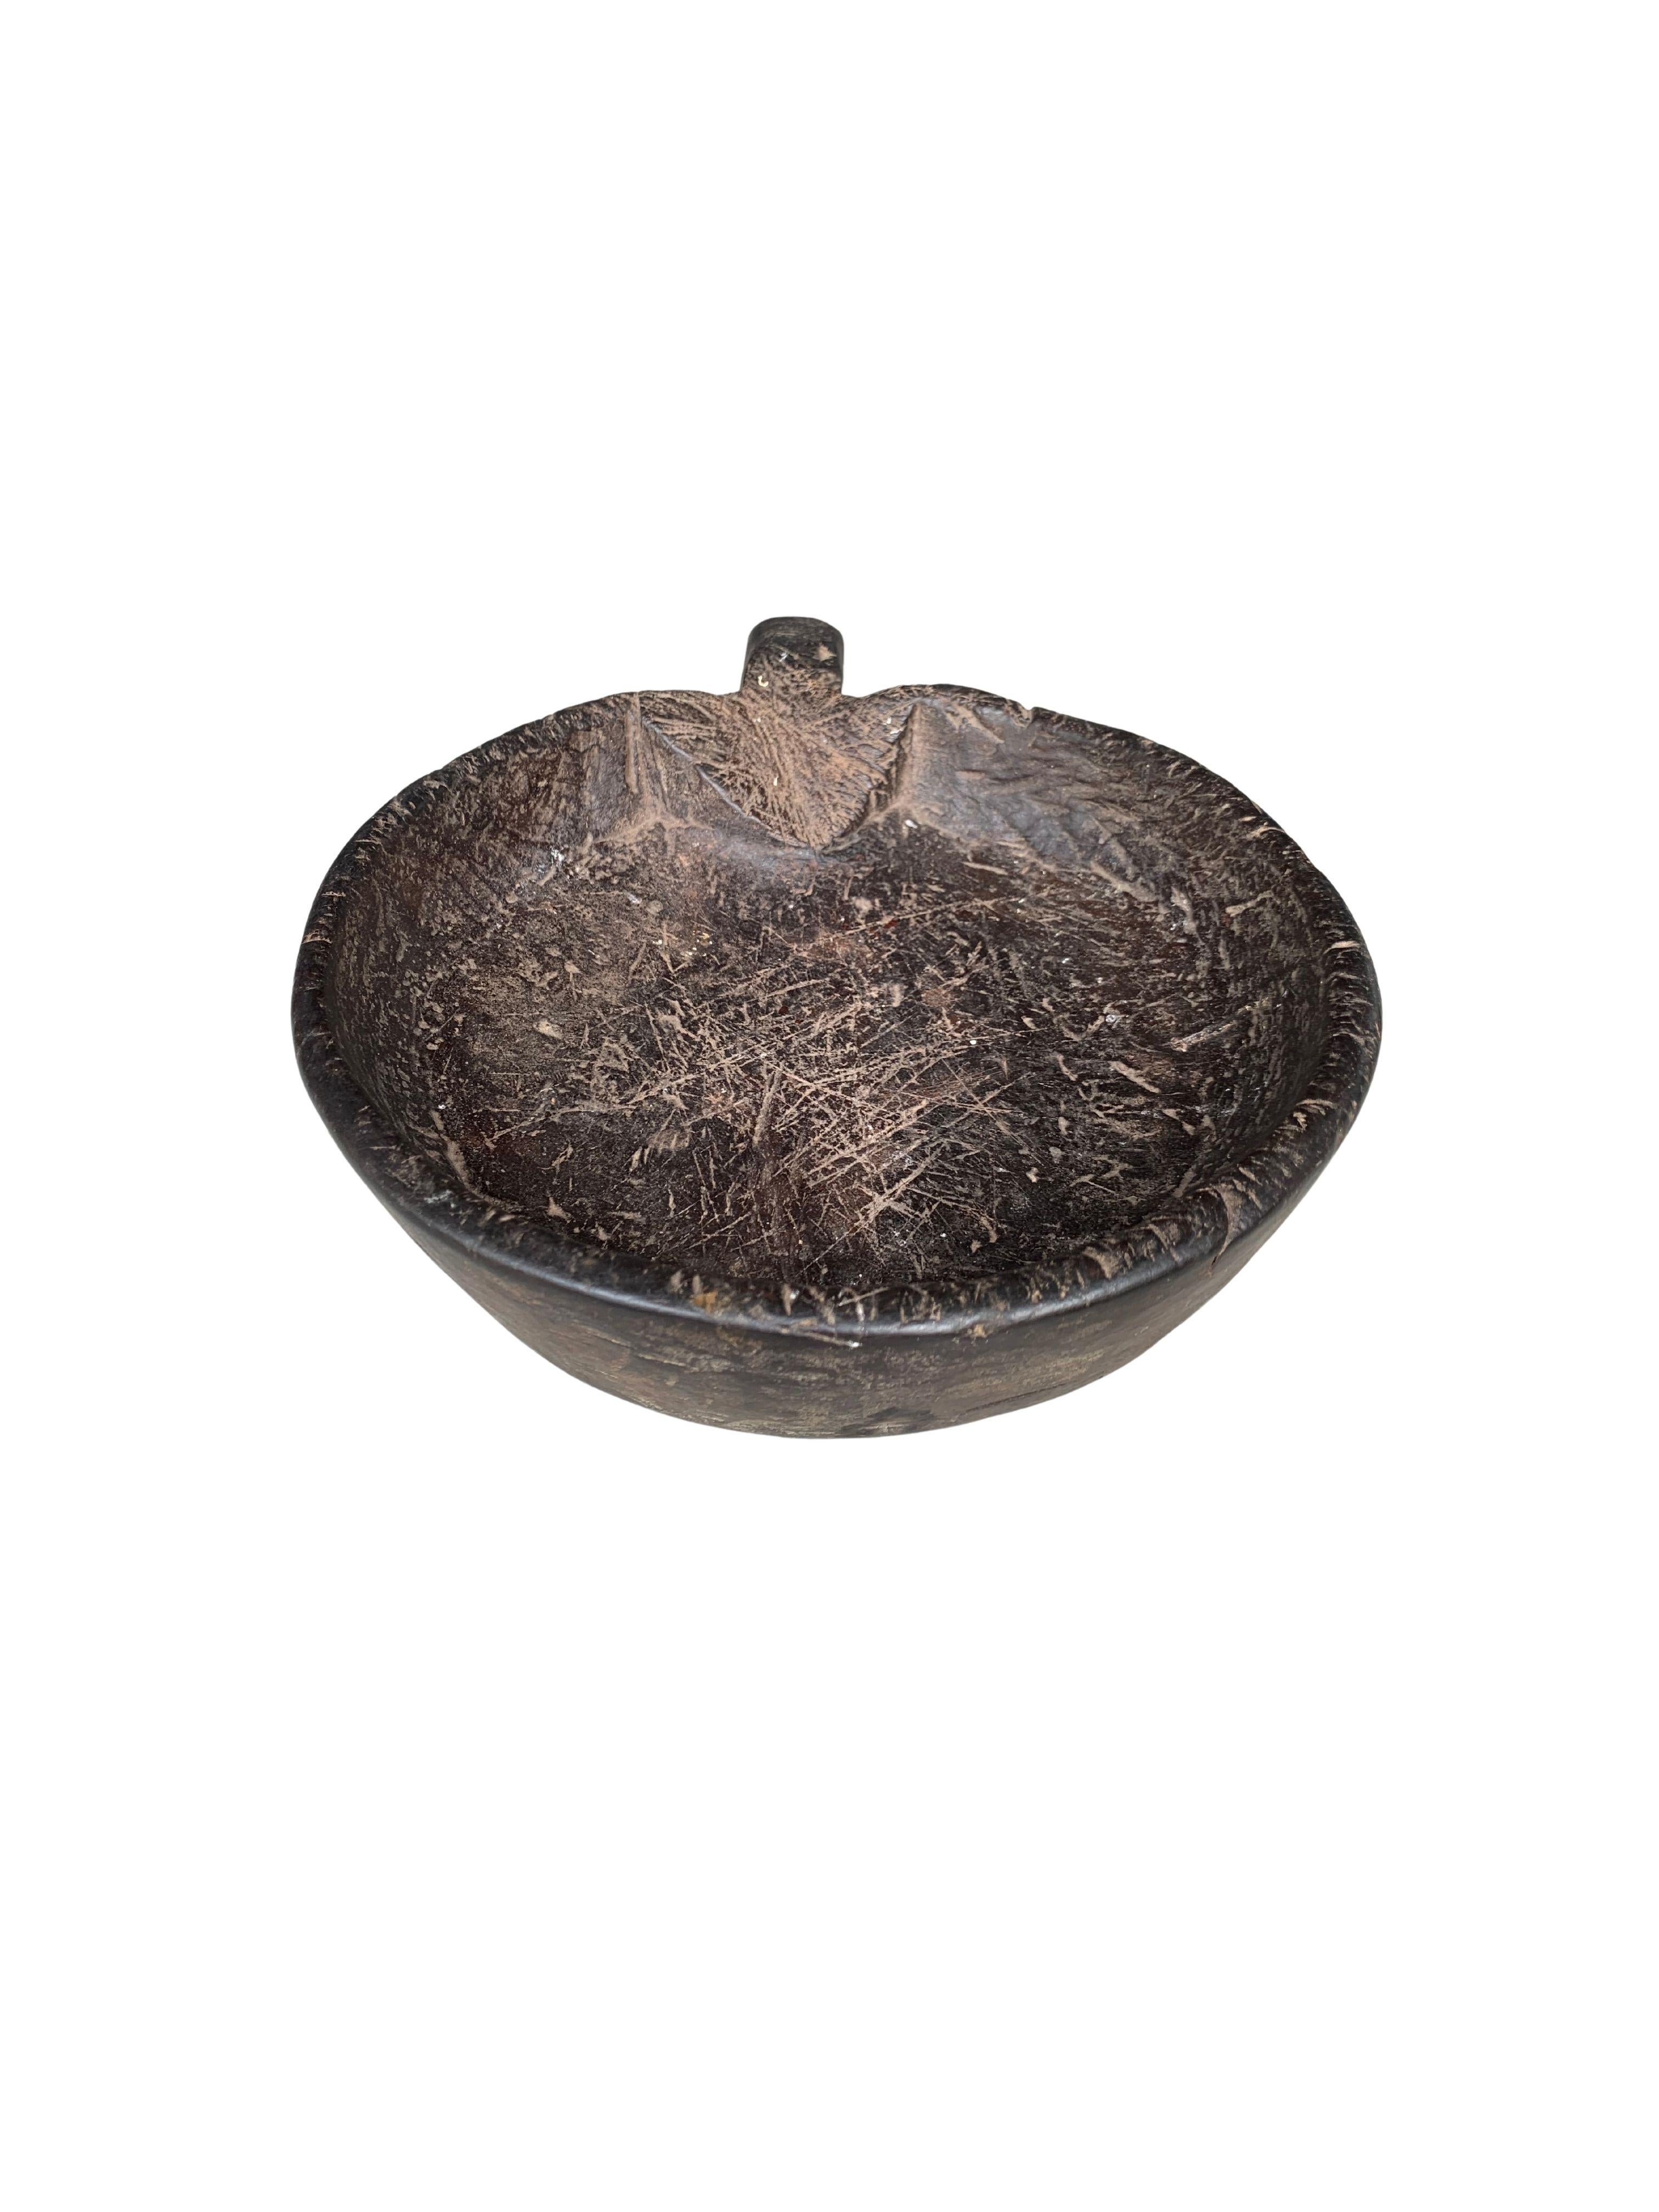 Indonesian Mentawai Tribe Hand-Carved Wooden Bowl with Handle, c. 1900 For Sale